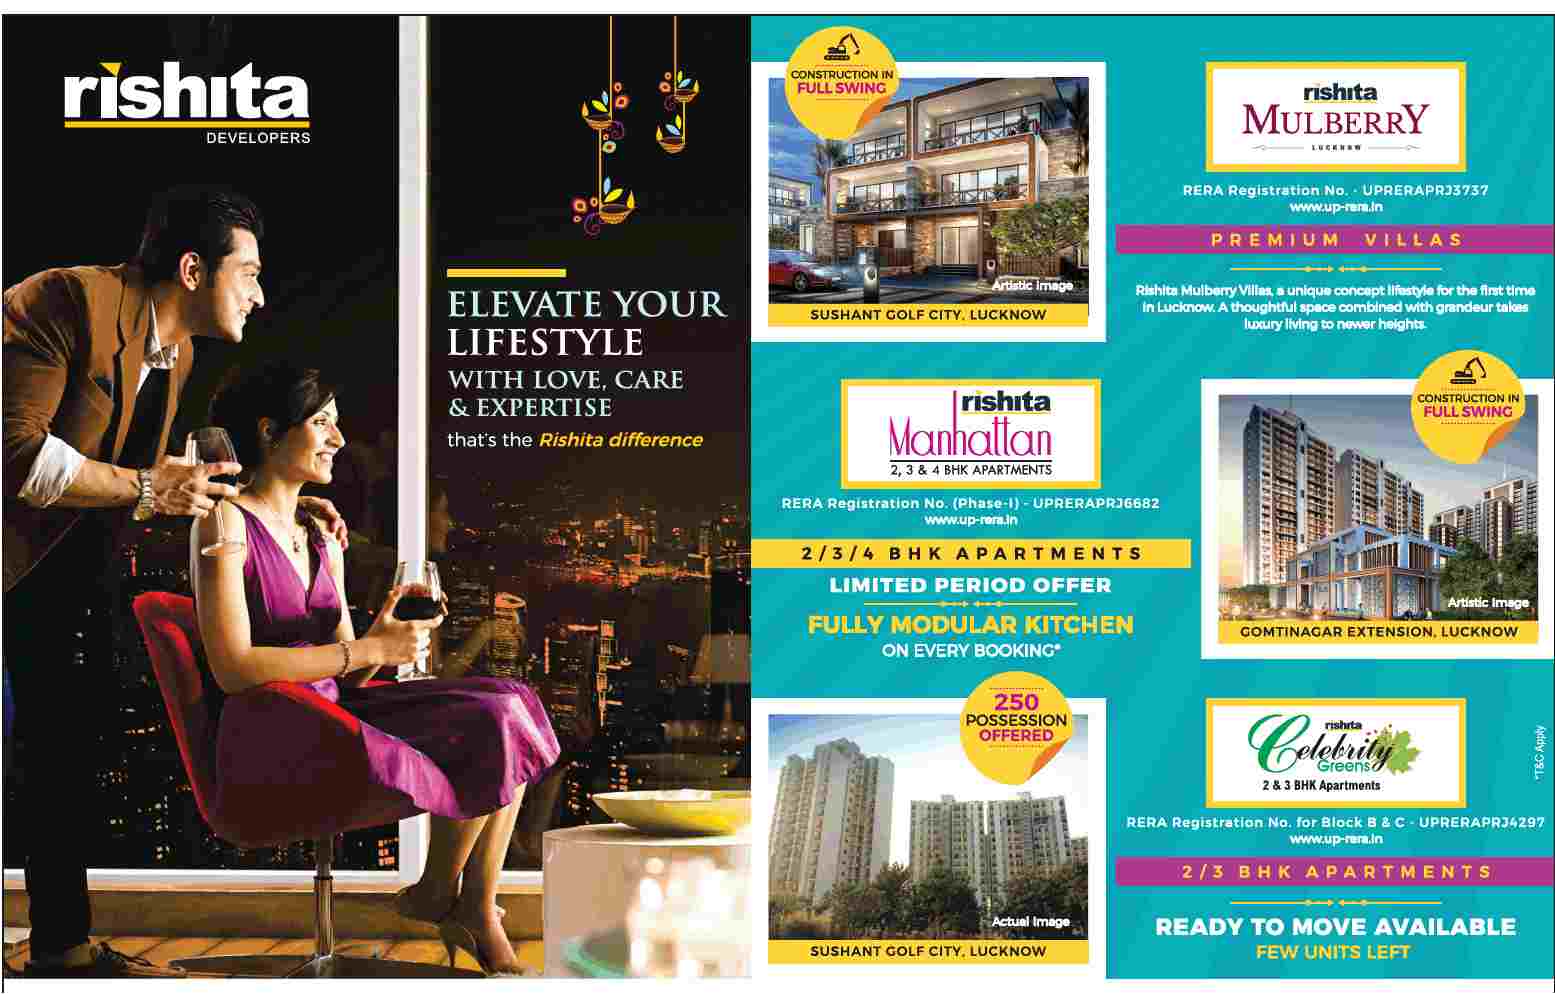 Elevate your lifestyle with love, care and expertise at Rishita Properties in Lucknow